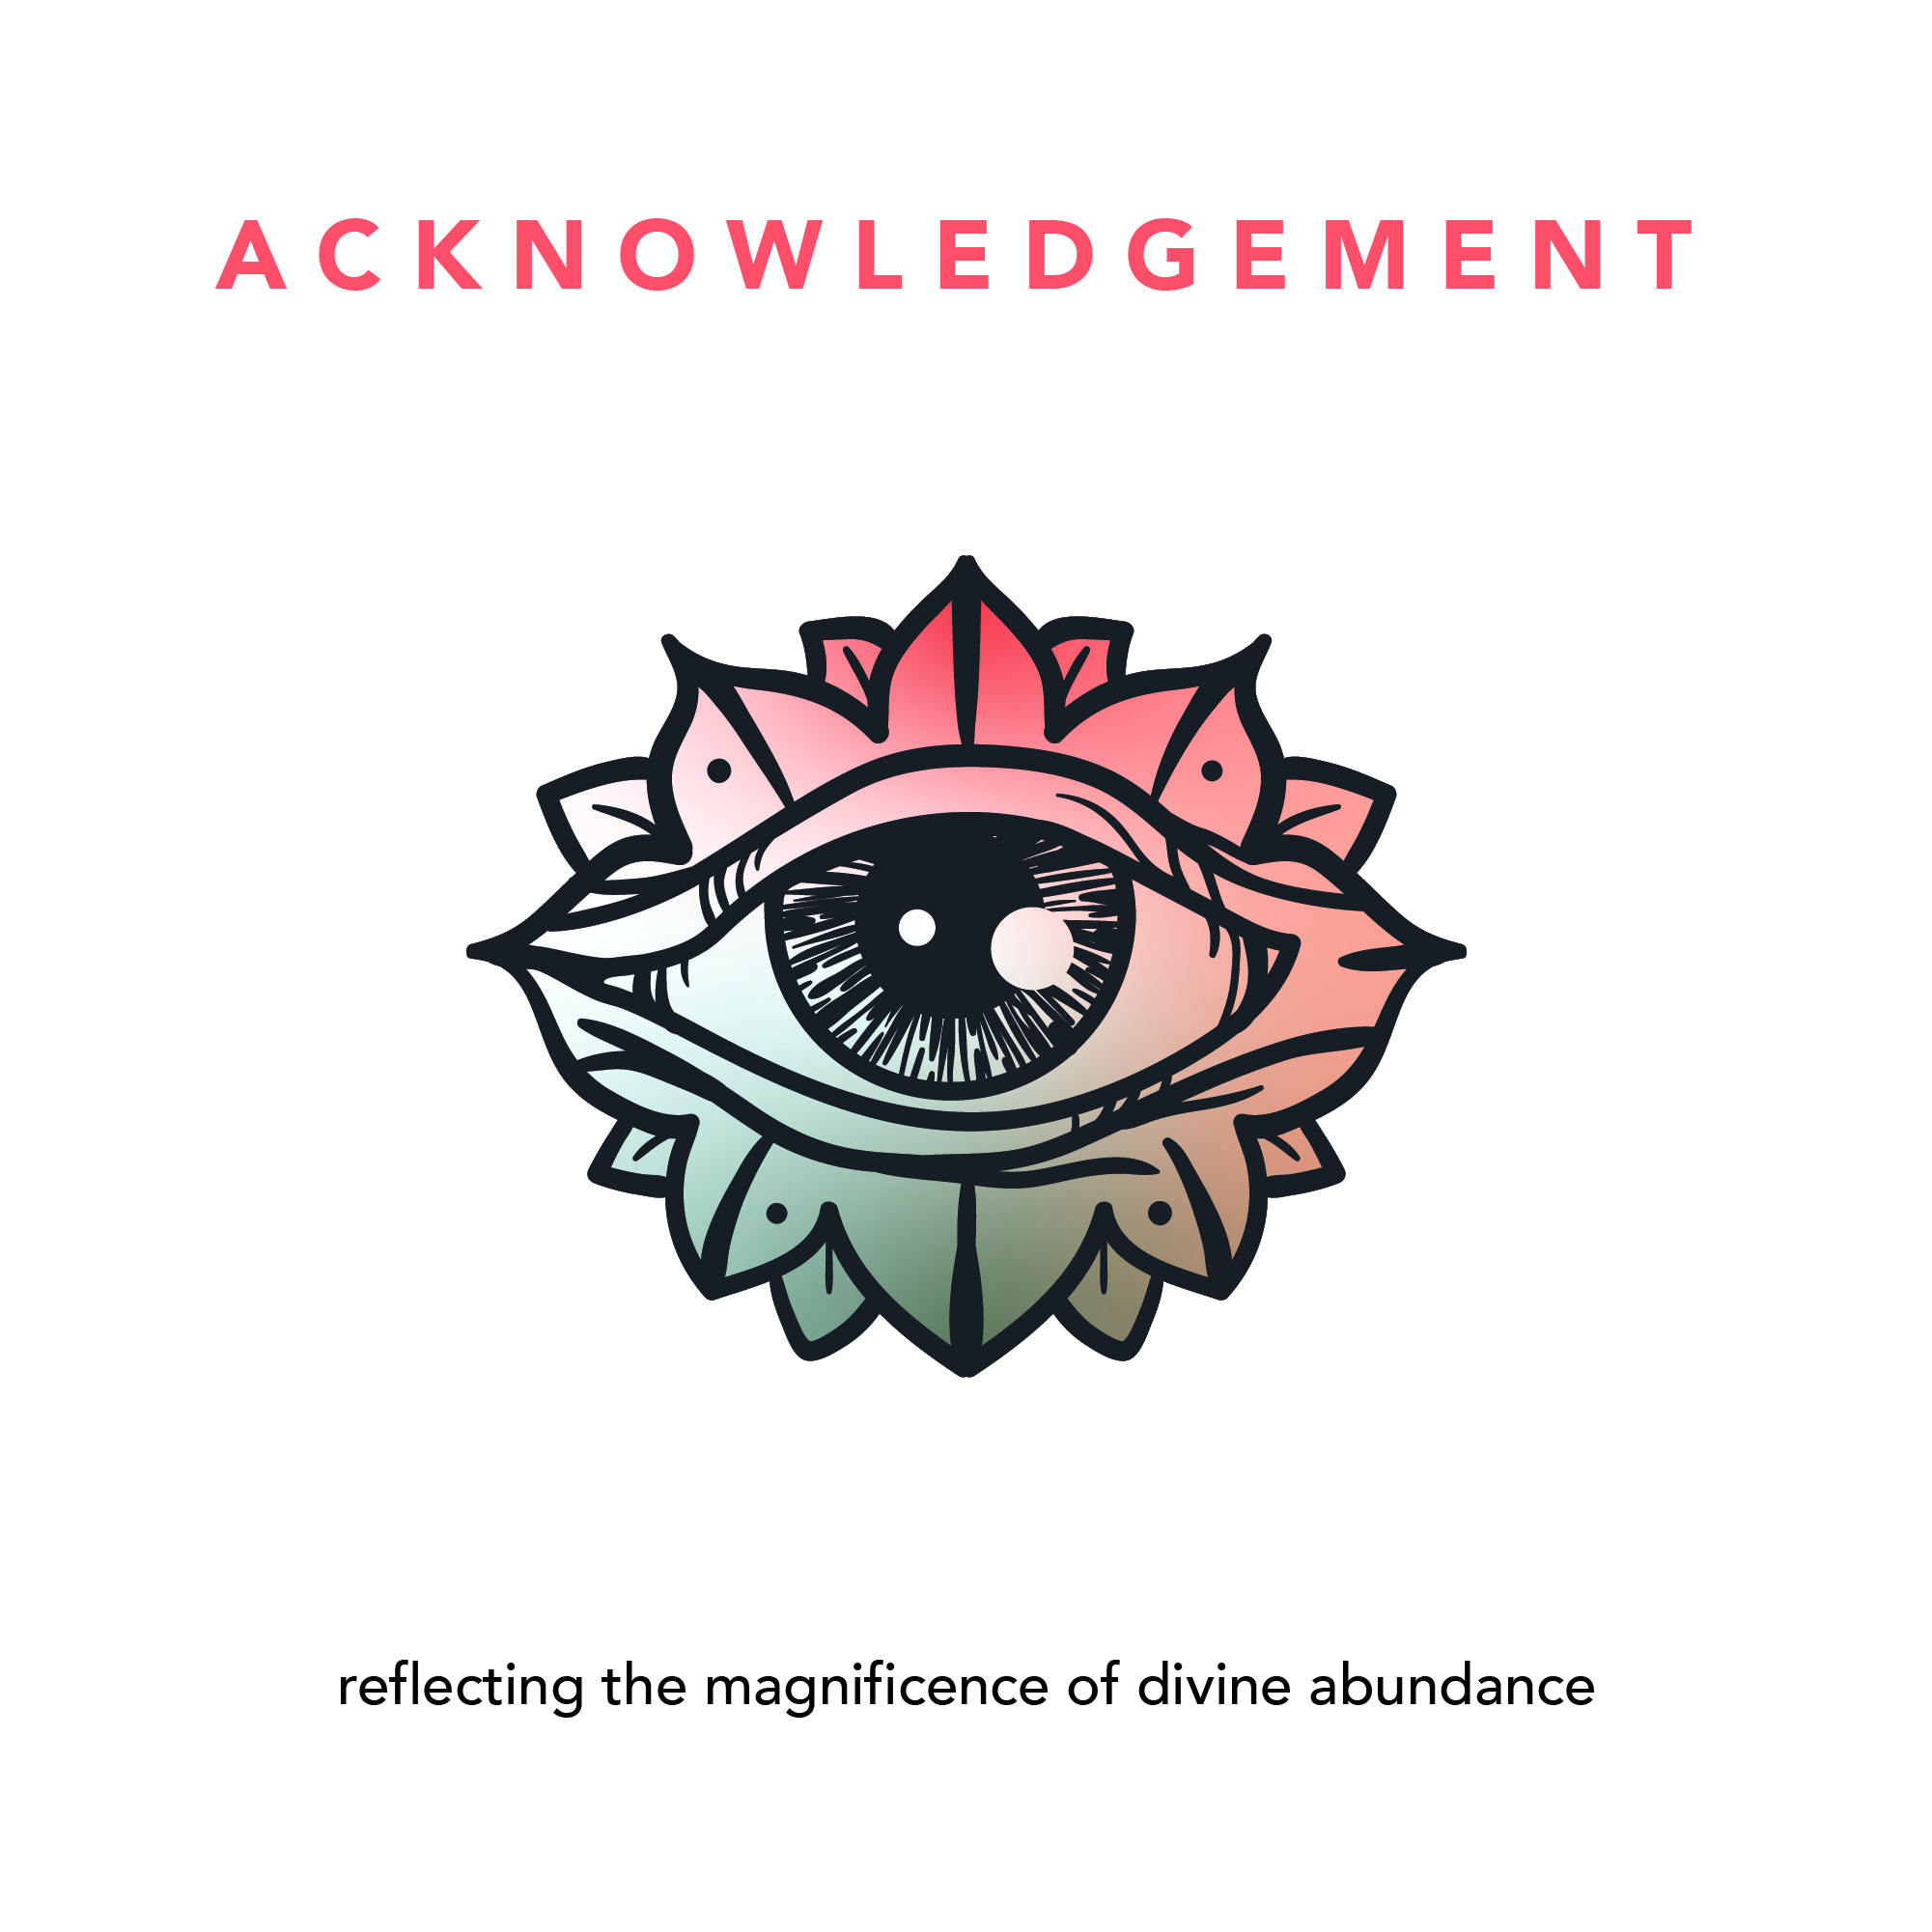 ACKNOWLEDGEMENT - reflecting the magnificence of divine abundance